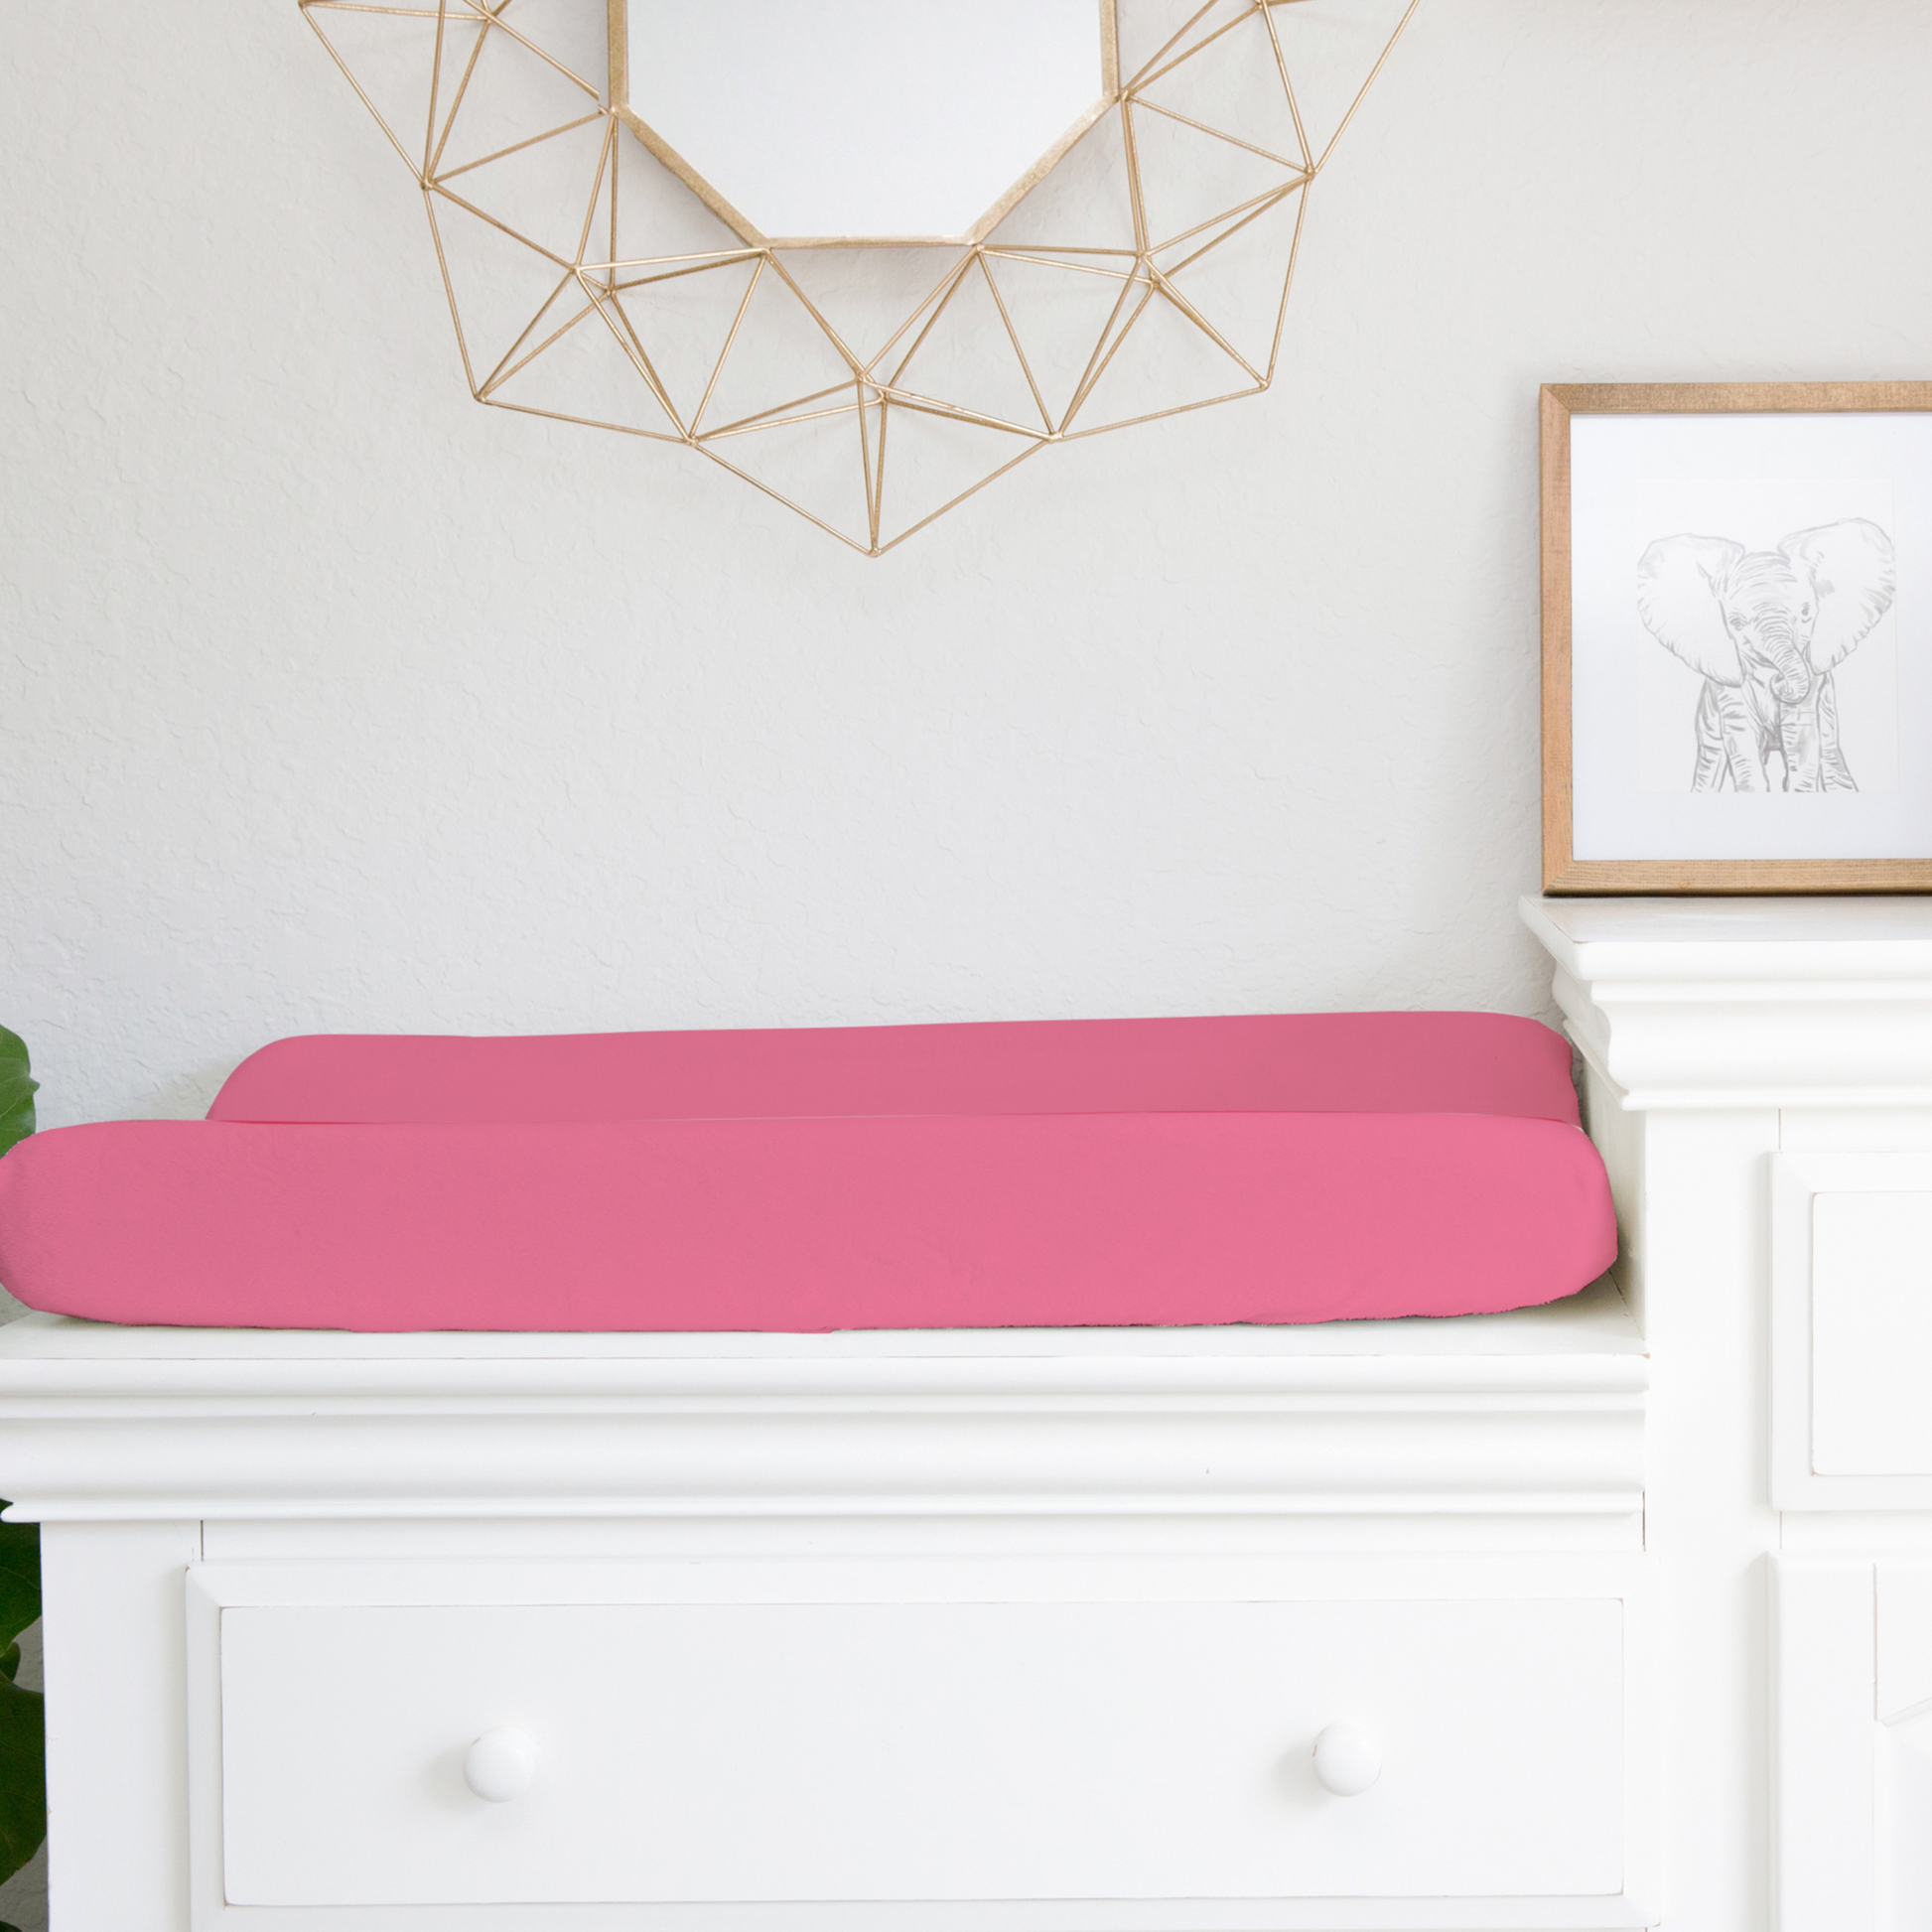 solid hot pink changing pad cover shown on a changing pad